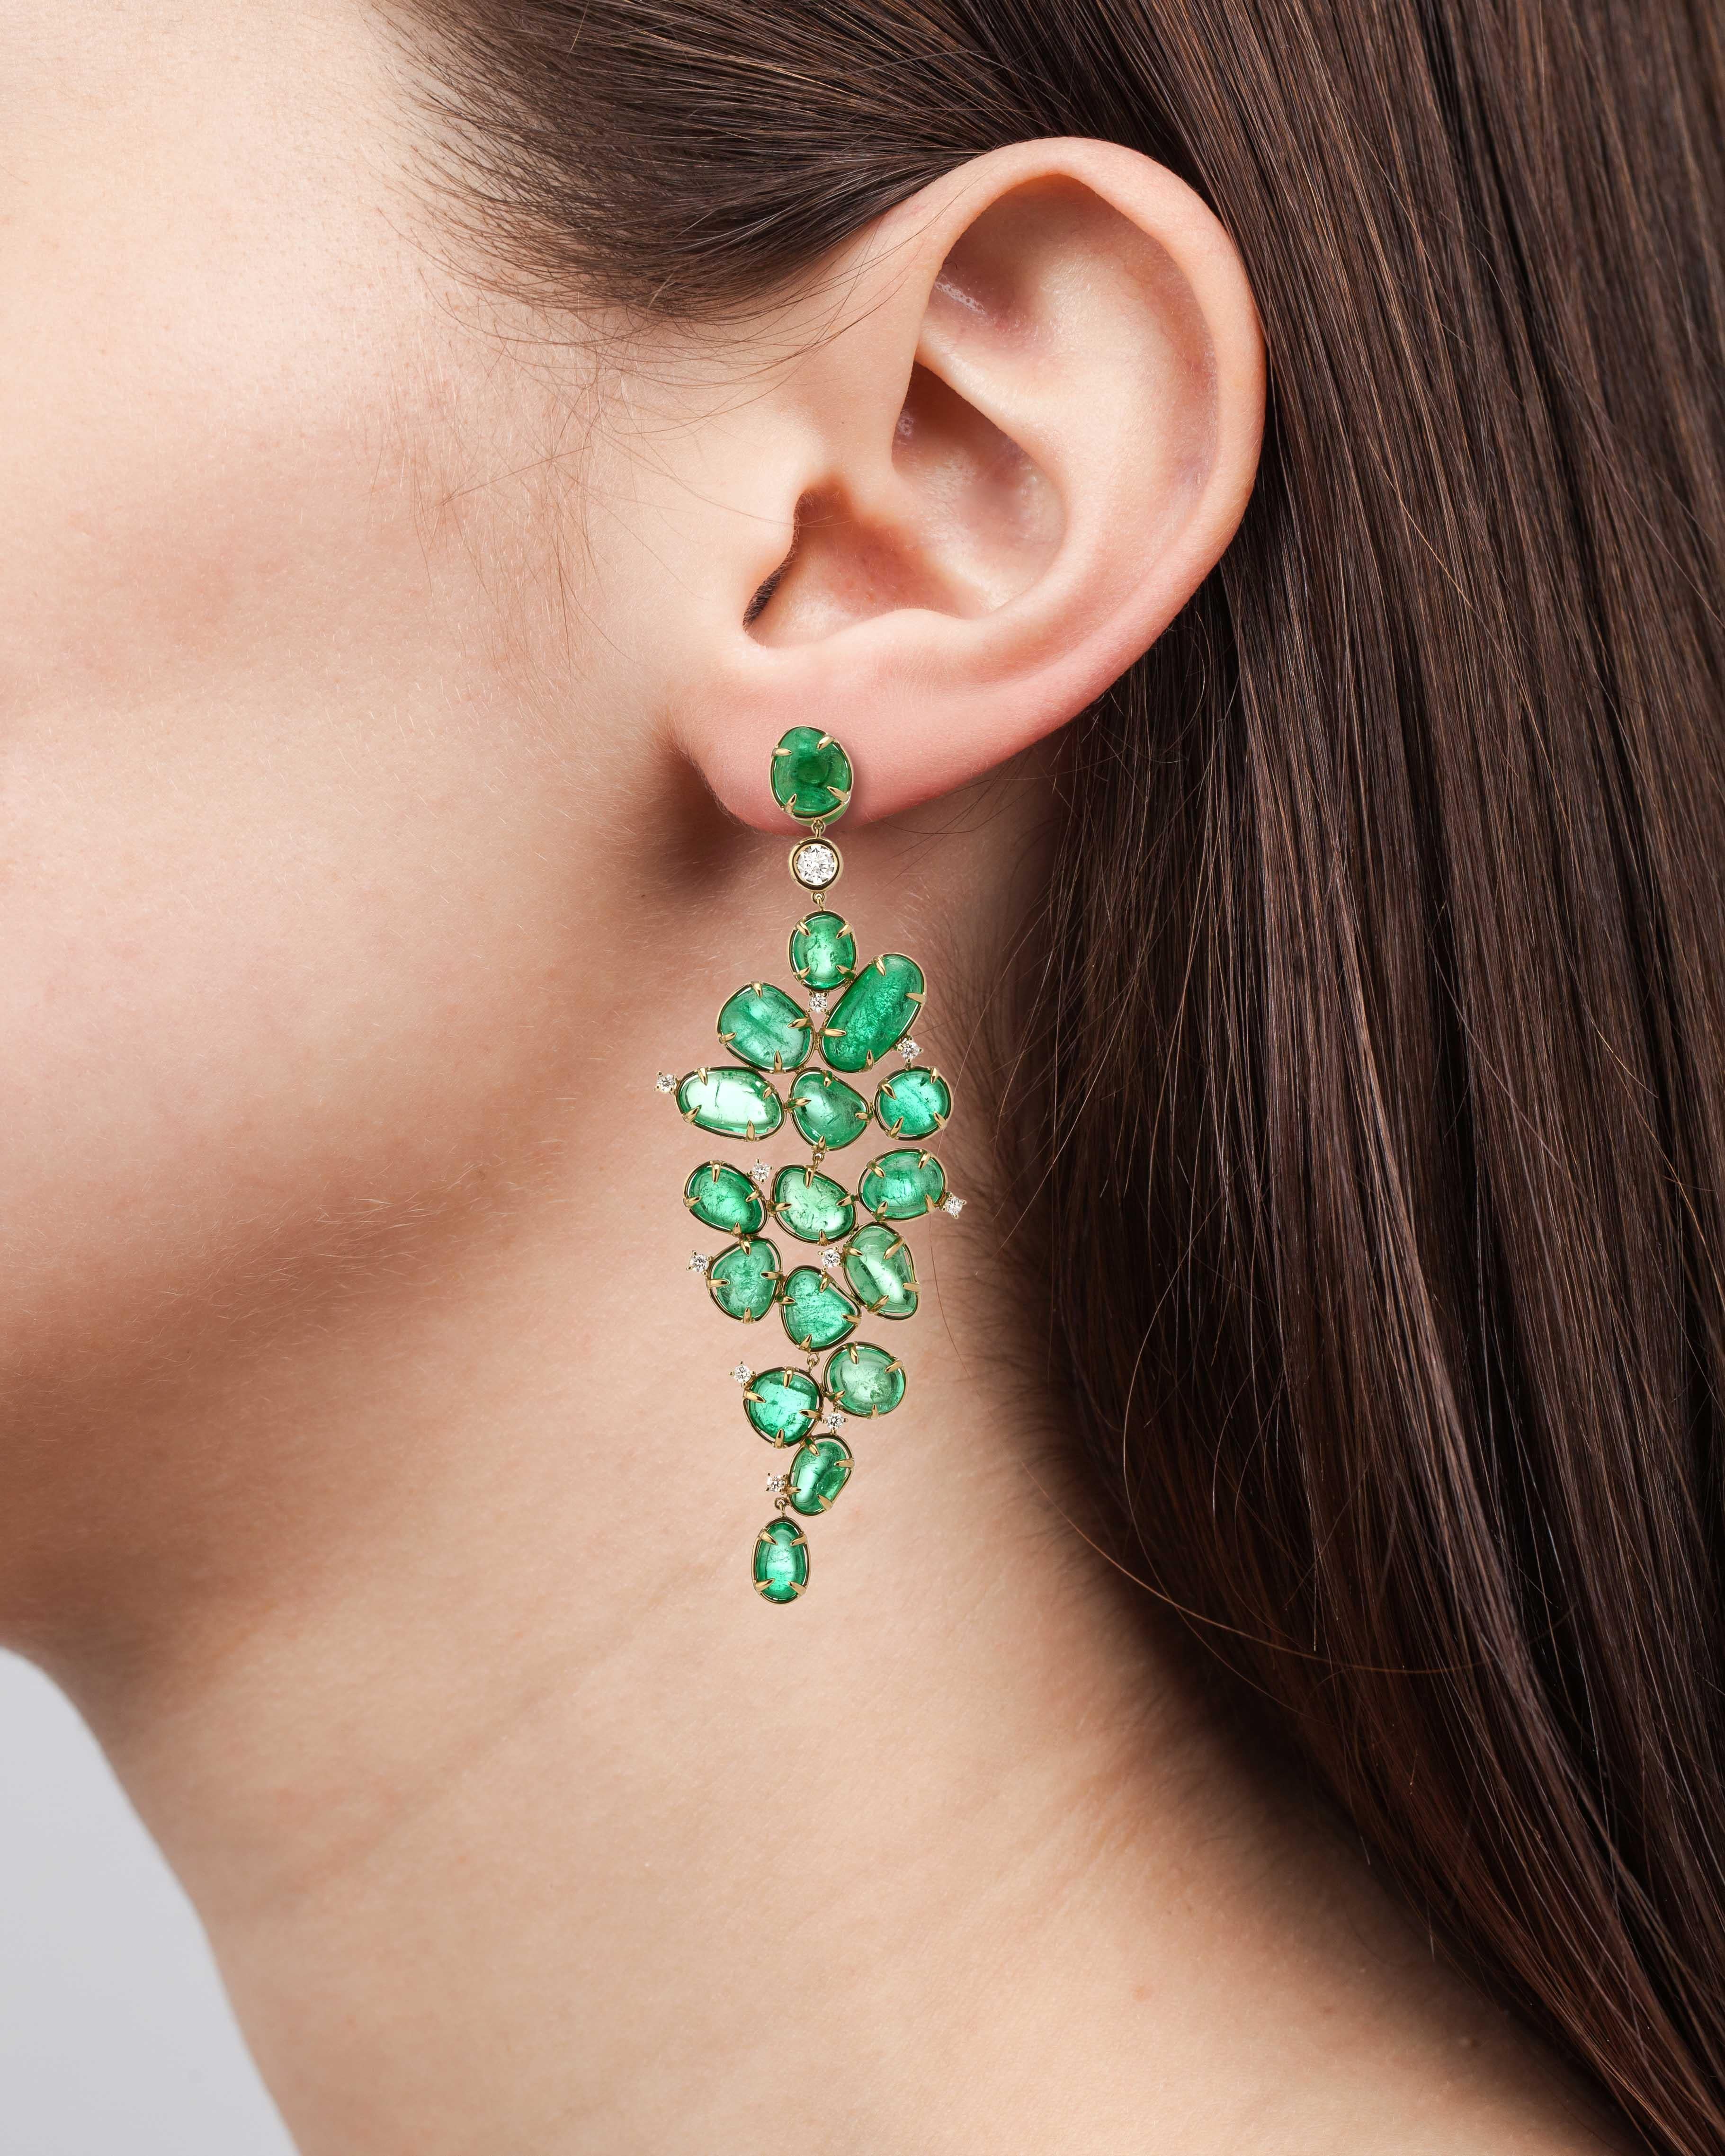 Baroque style 18 Karat yellow gold earrings set with organic Muzo emeralds of 65.53 carats and 1.57 carats of brilliant cut diamonds.

Muzo Emerald Colombia Heritage Muisca Earrings set with 65.53 carats Emerald

Named in honor of the ancient